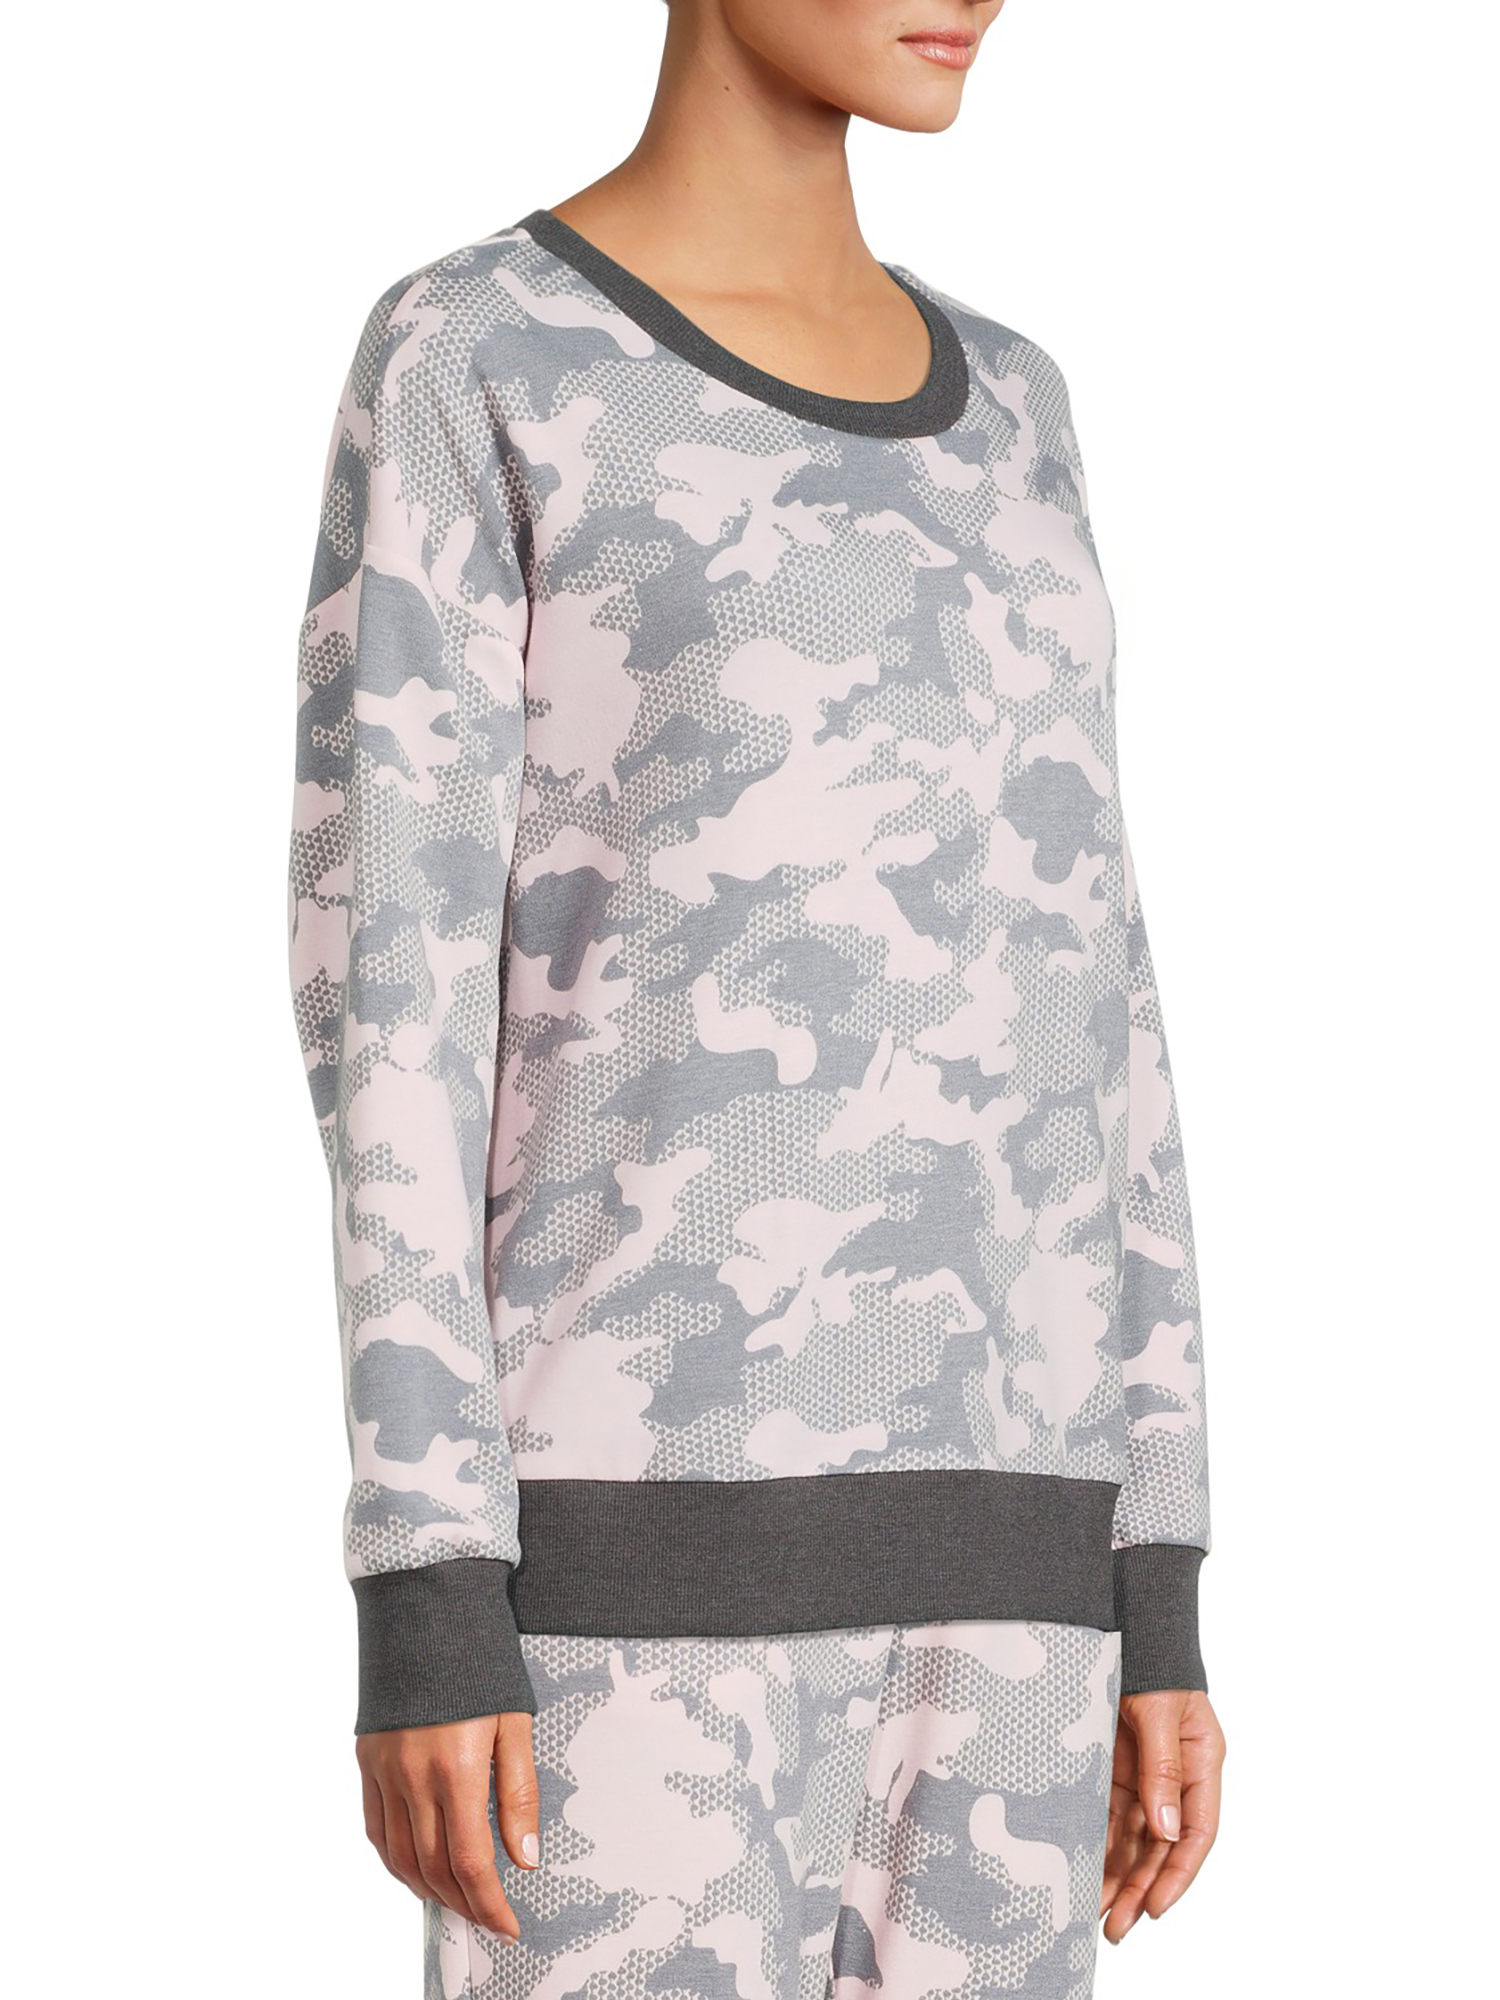 Reebok Long Sleeve Pullover Relaxed Fit Sweatshirt (Women's) 1 Pack - image 4 of 6